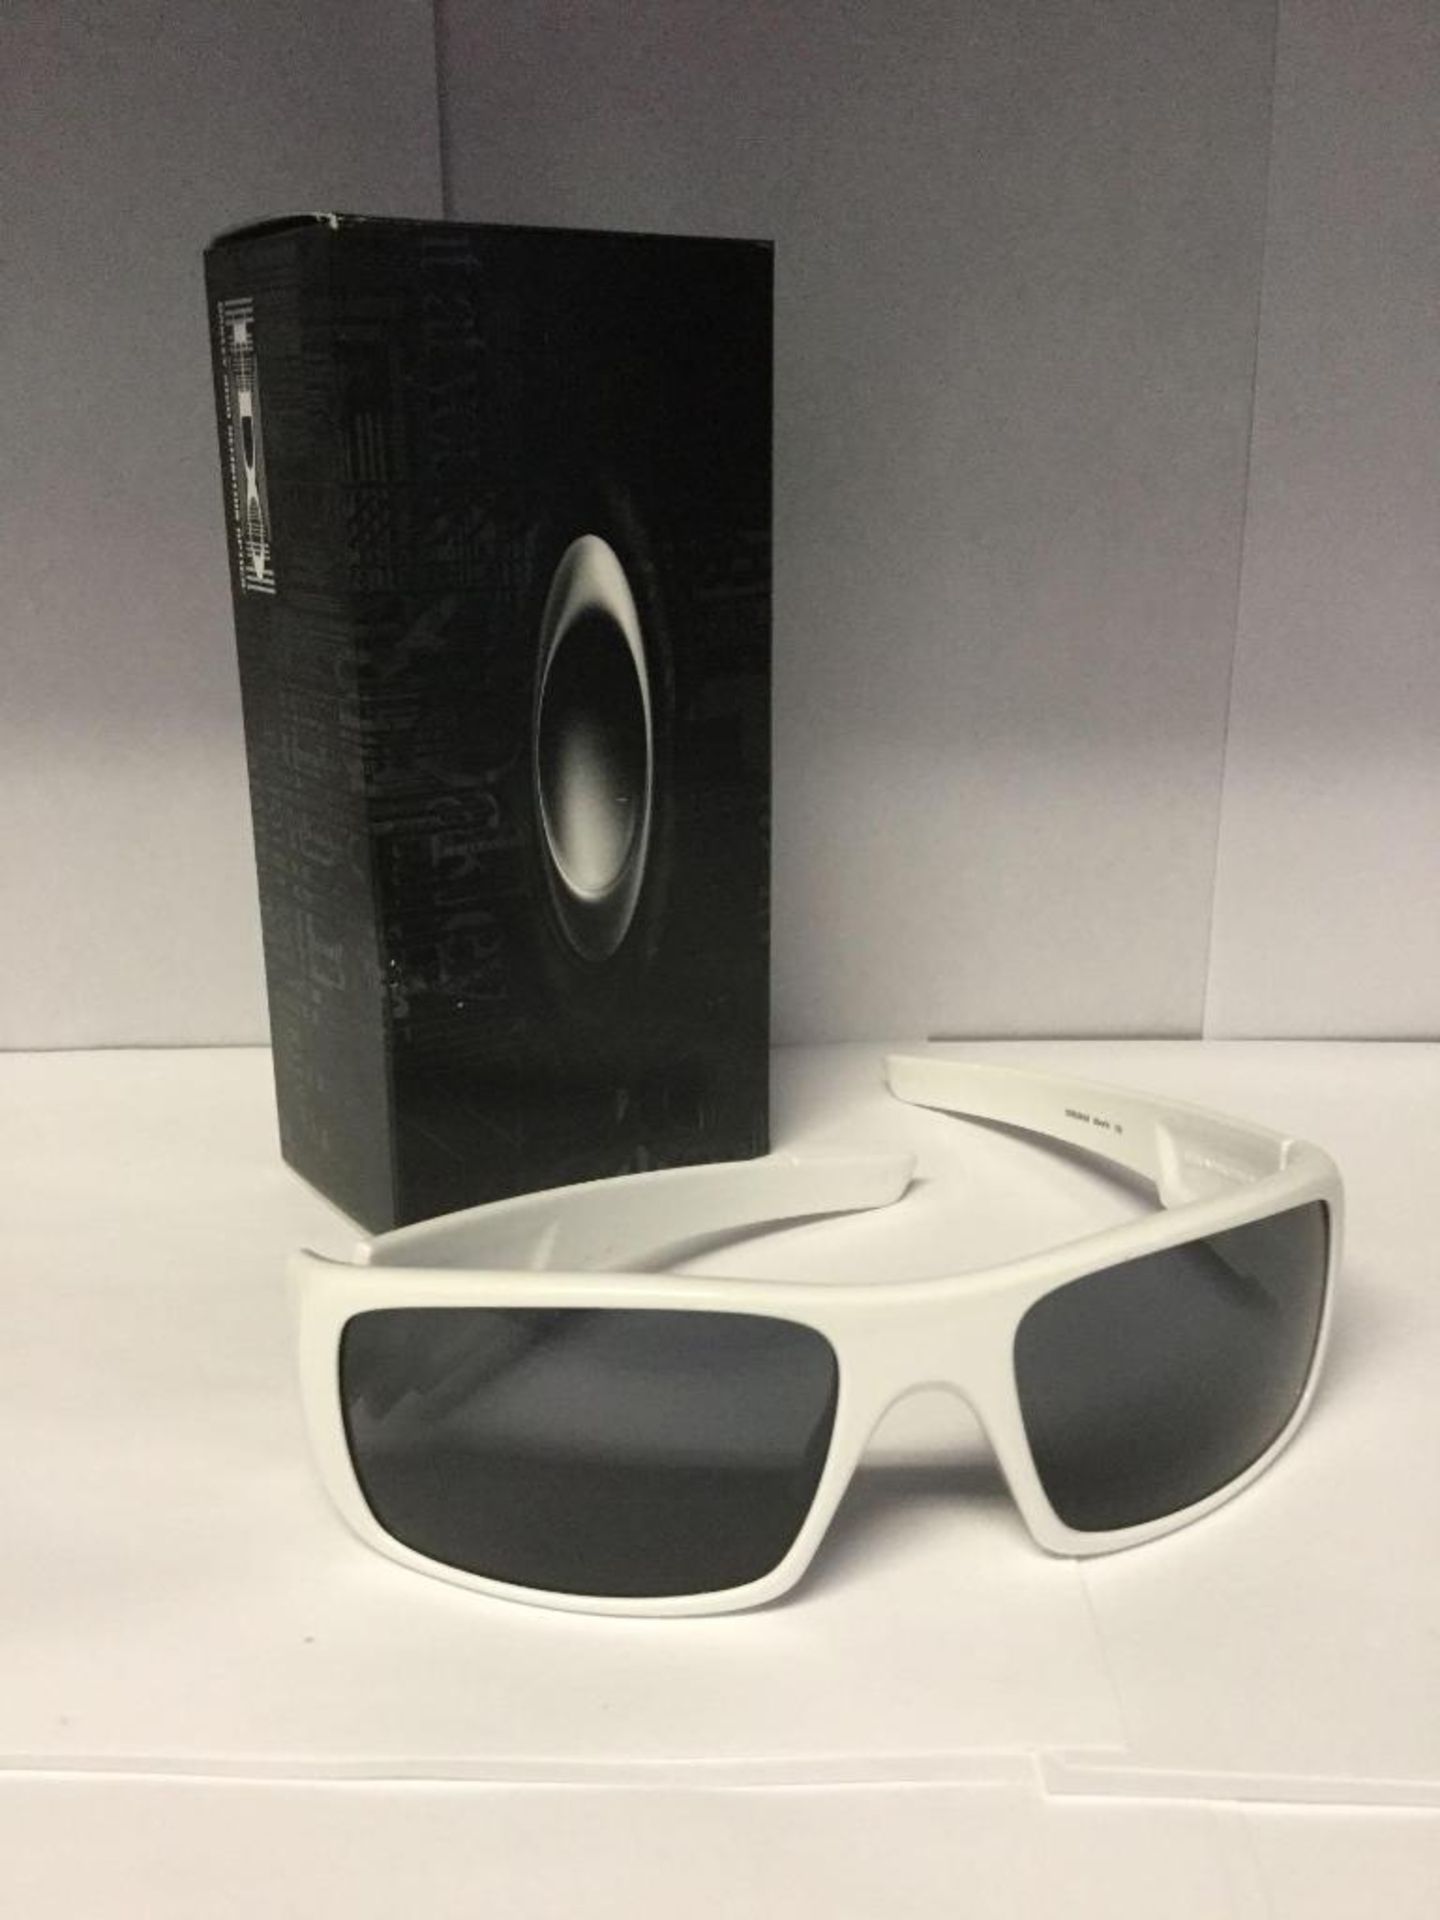 Oakley Sunglasses with box and bag